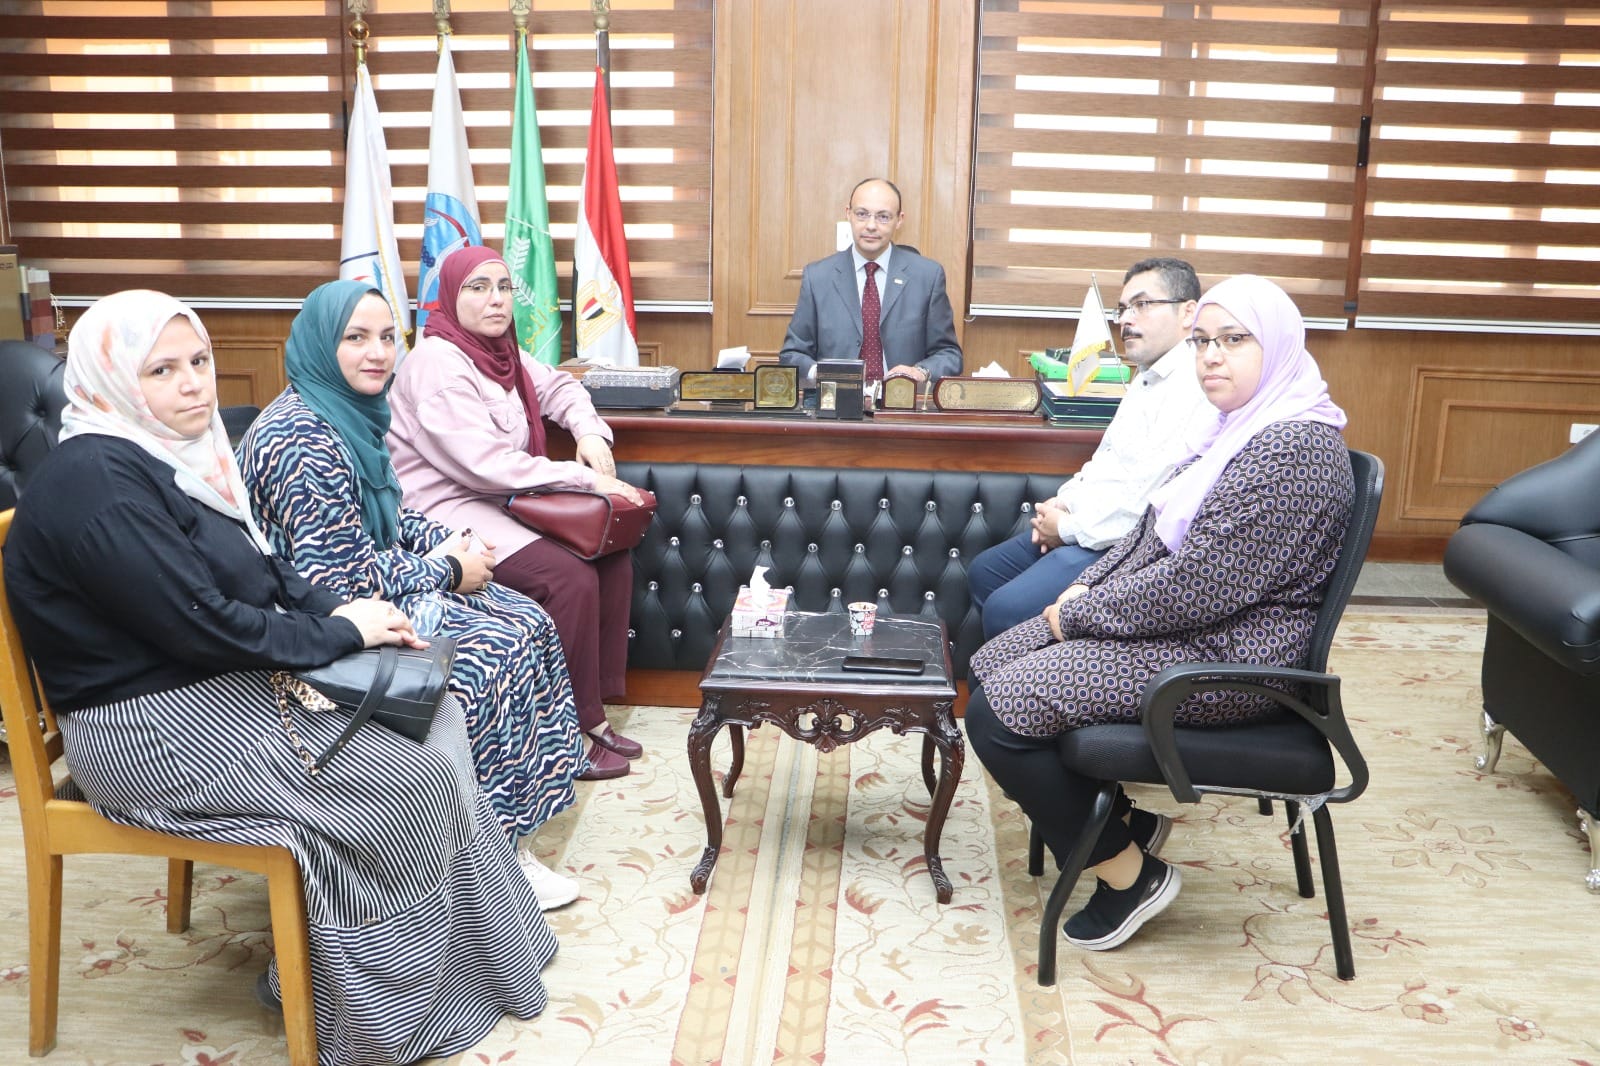 The Dean of the College meets with the General Administration of Engineering Affairs at the University